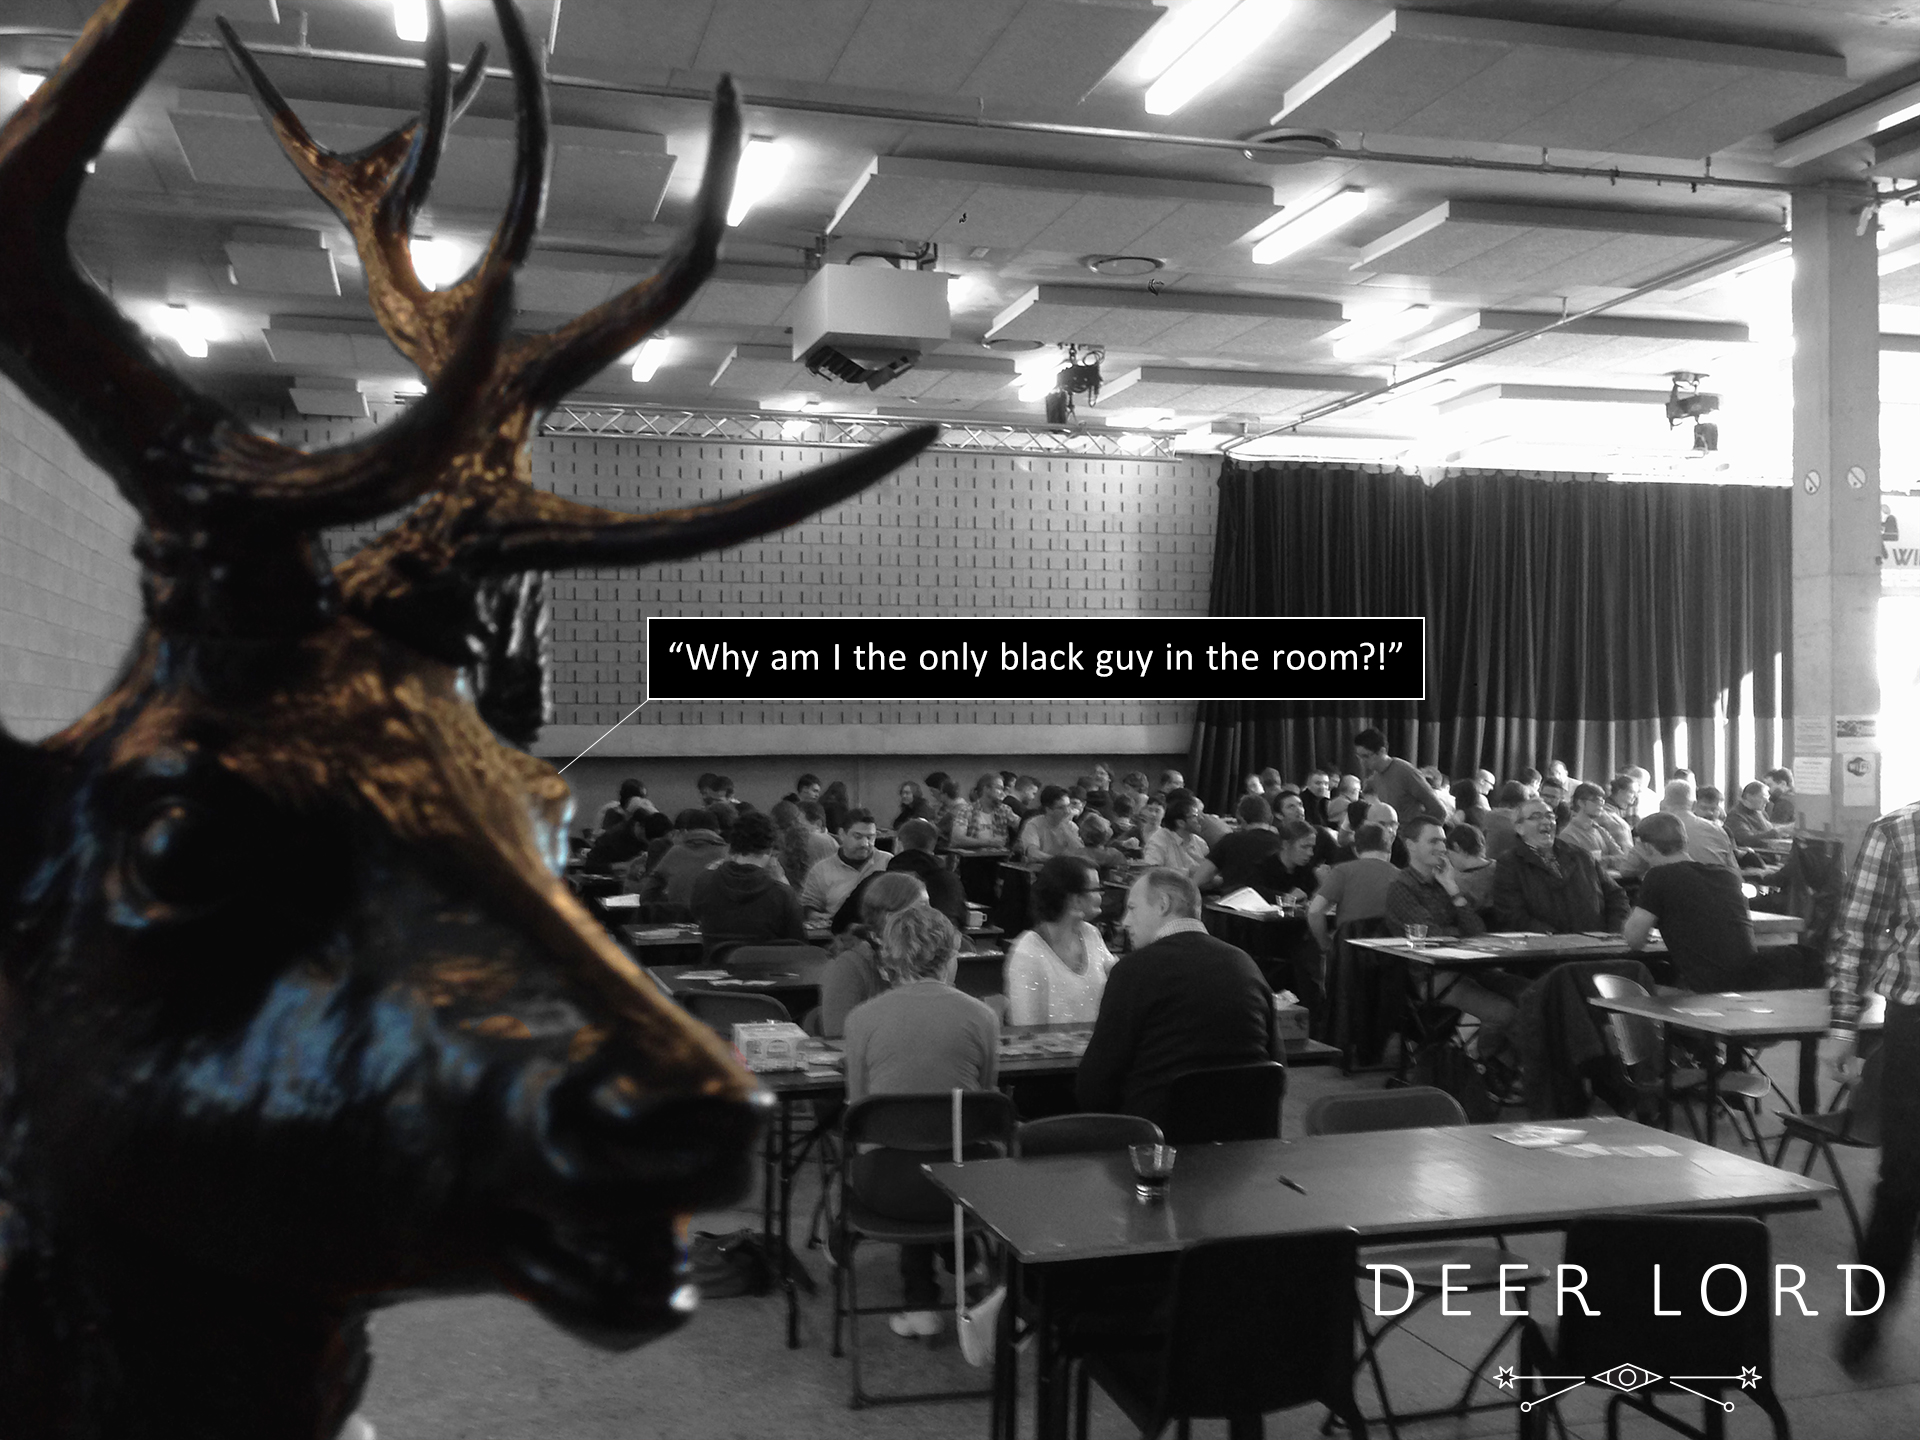 deer lord is the only black guy in the room